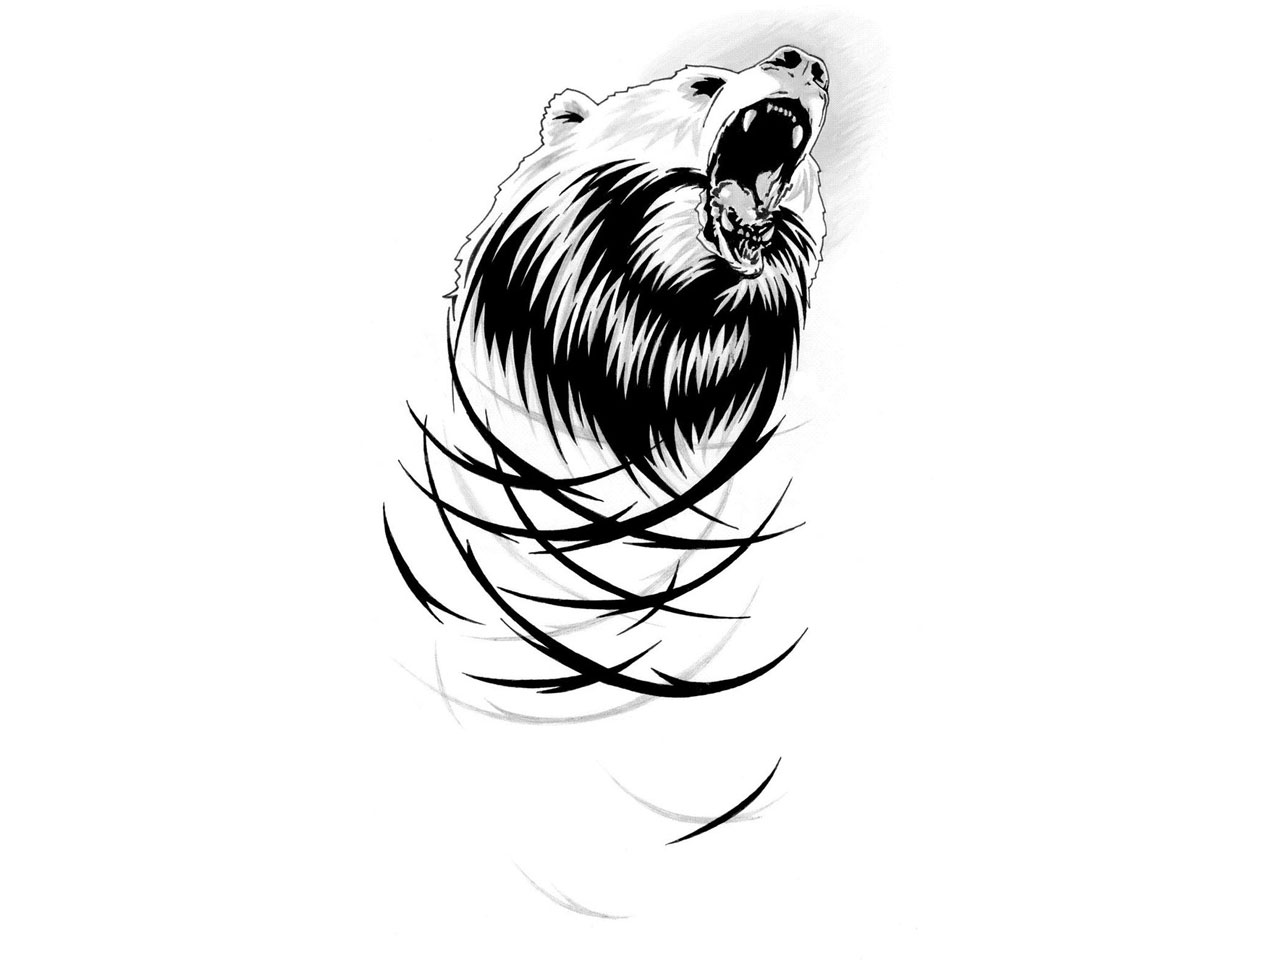 Howling bear head with tribal effect tattoo design